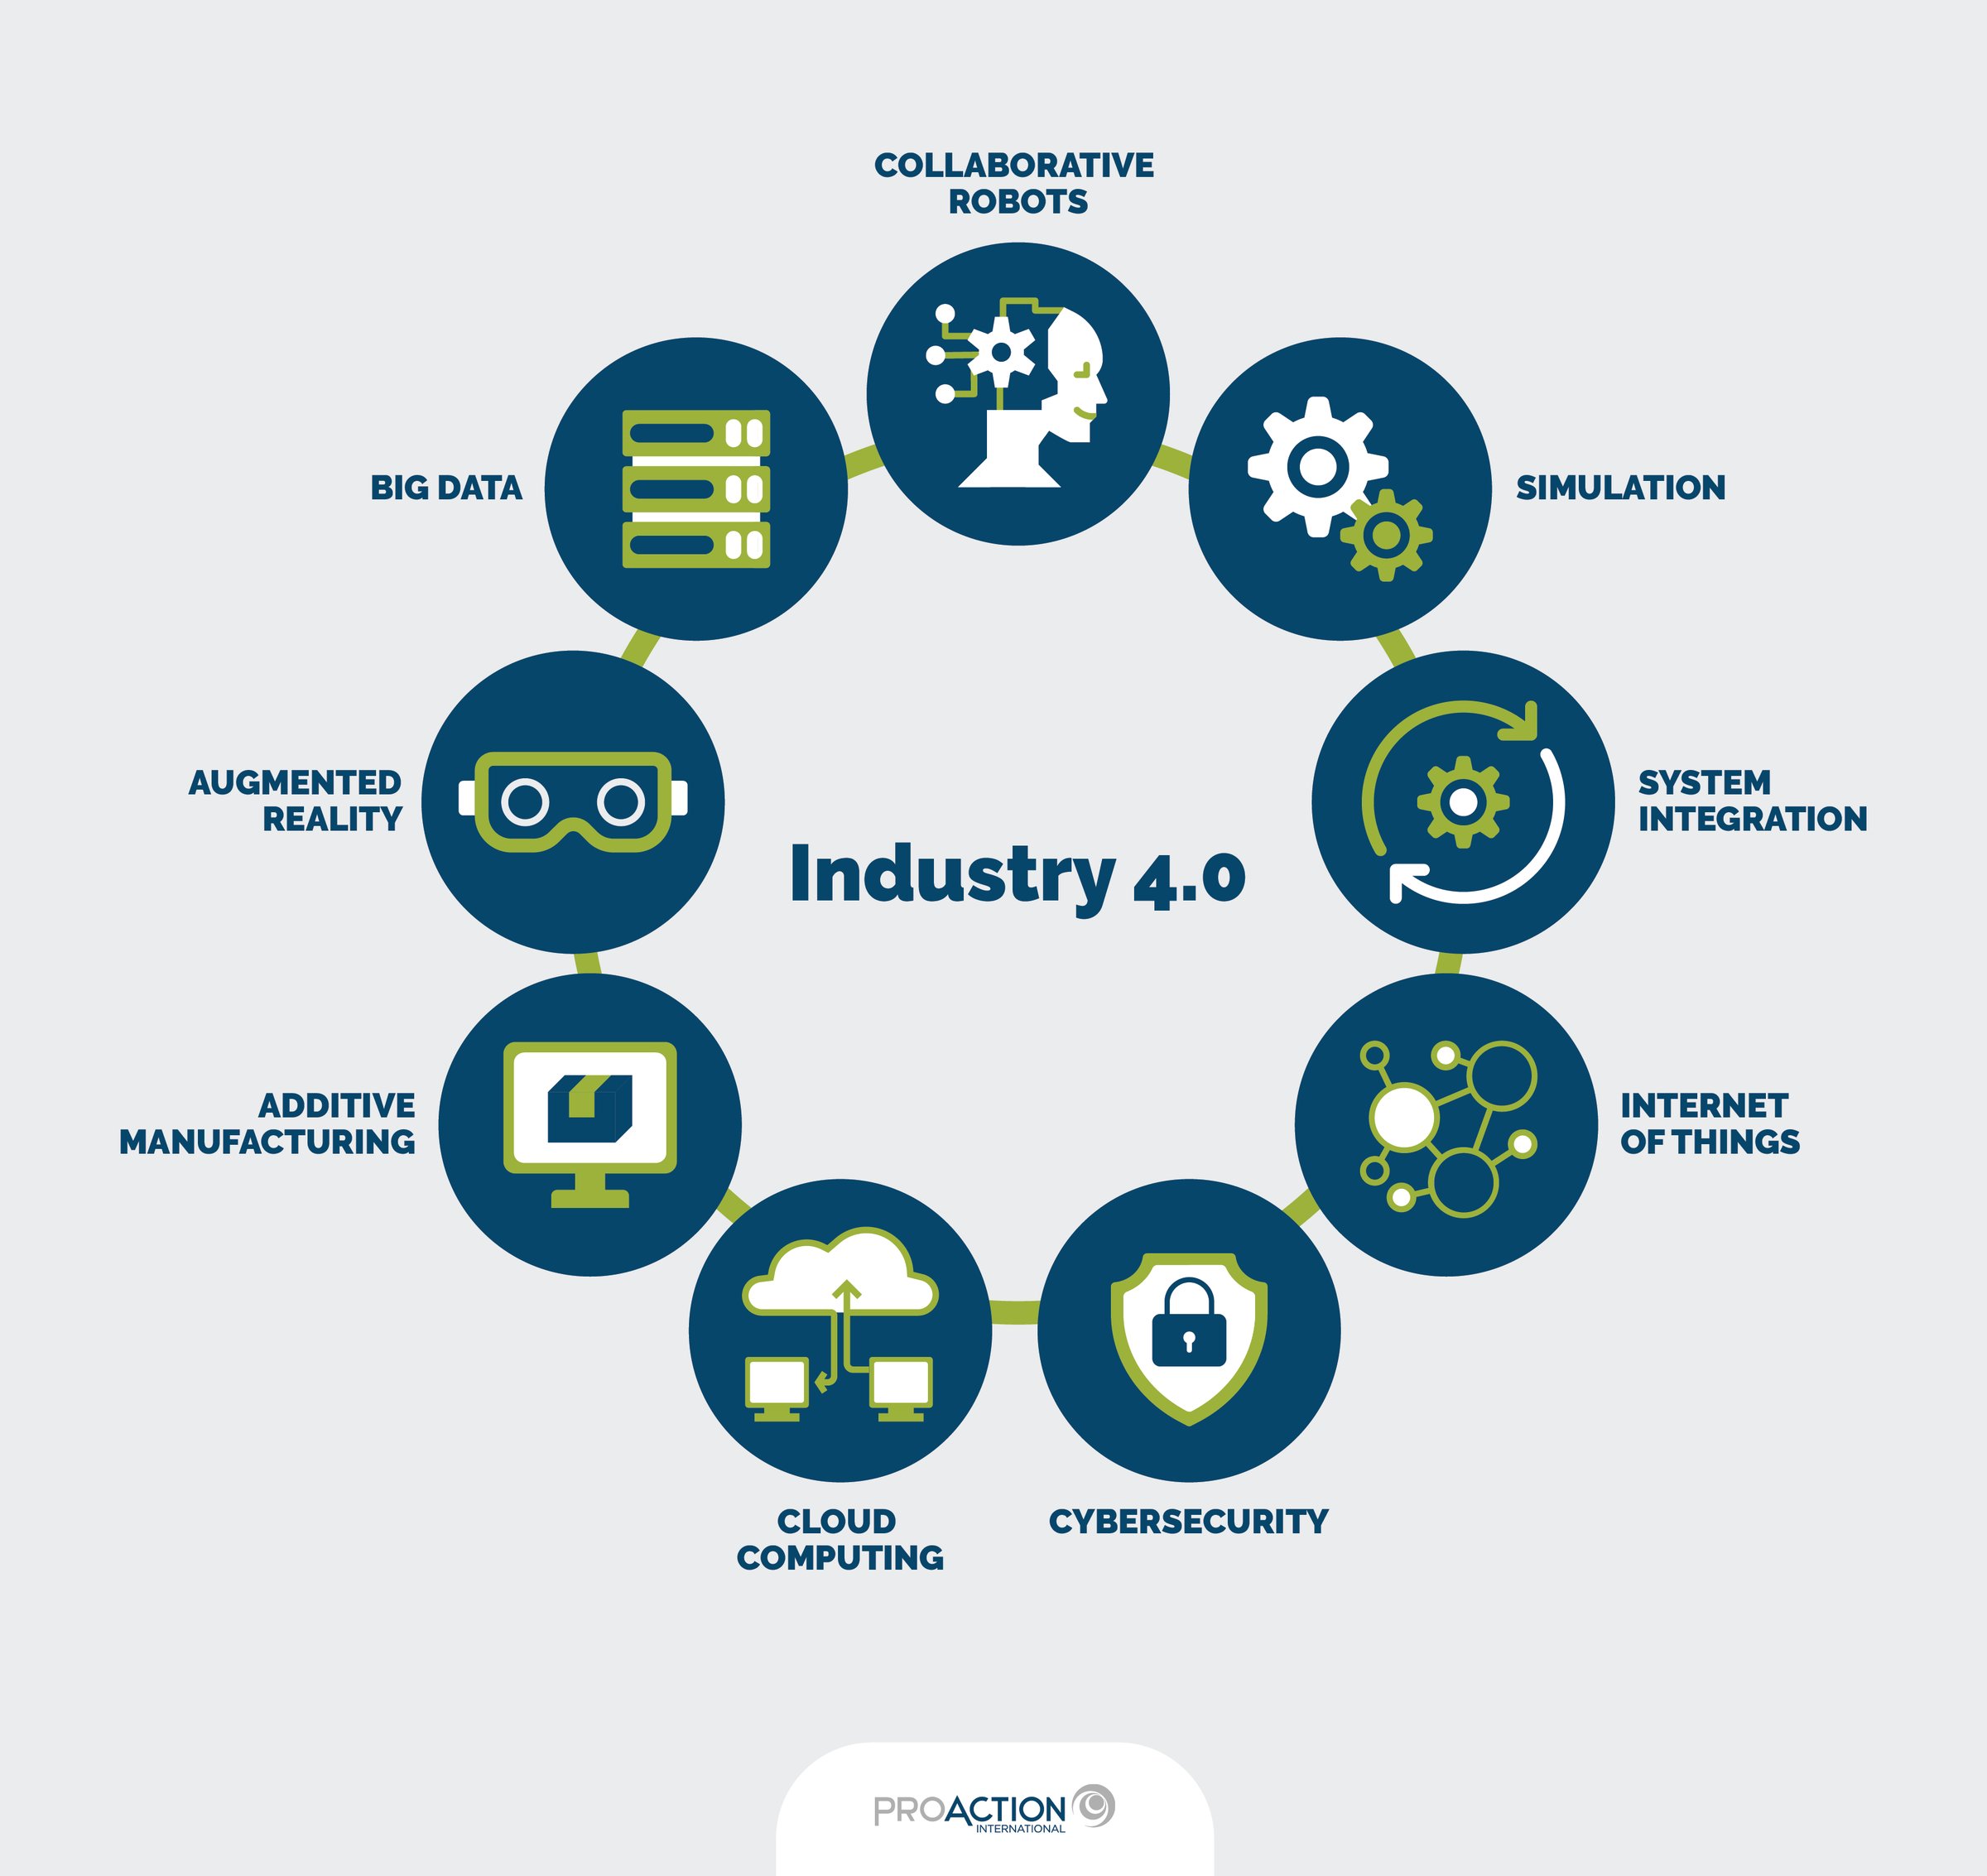 literature review on industry 4.0